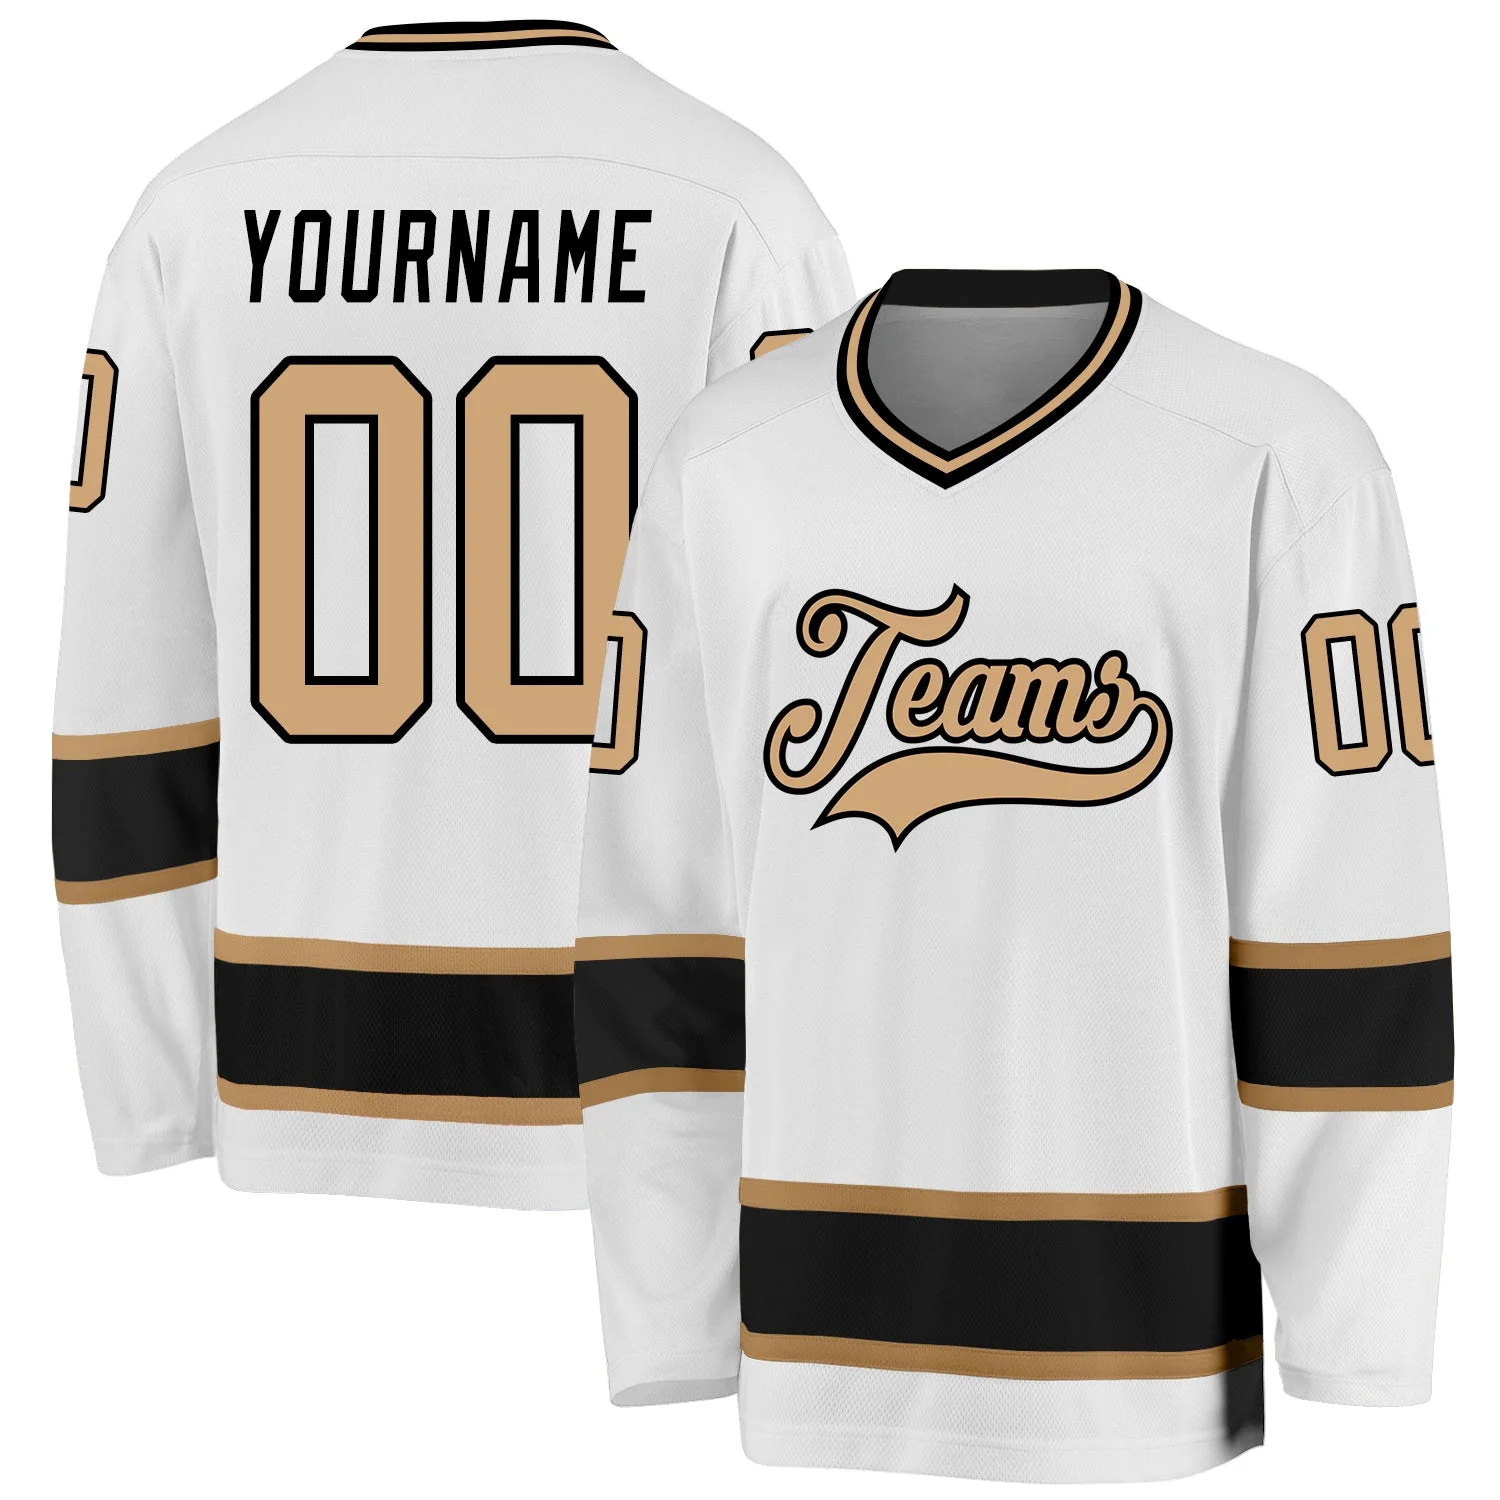 Stitched And Print White Old Gold-black Hockey Jersey Custom